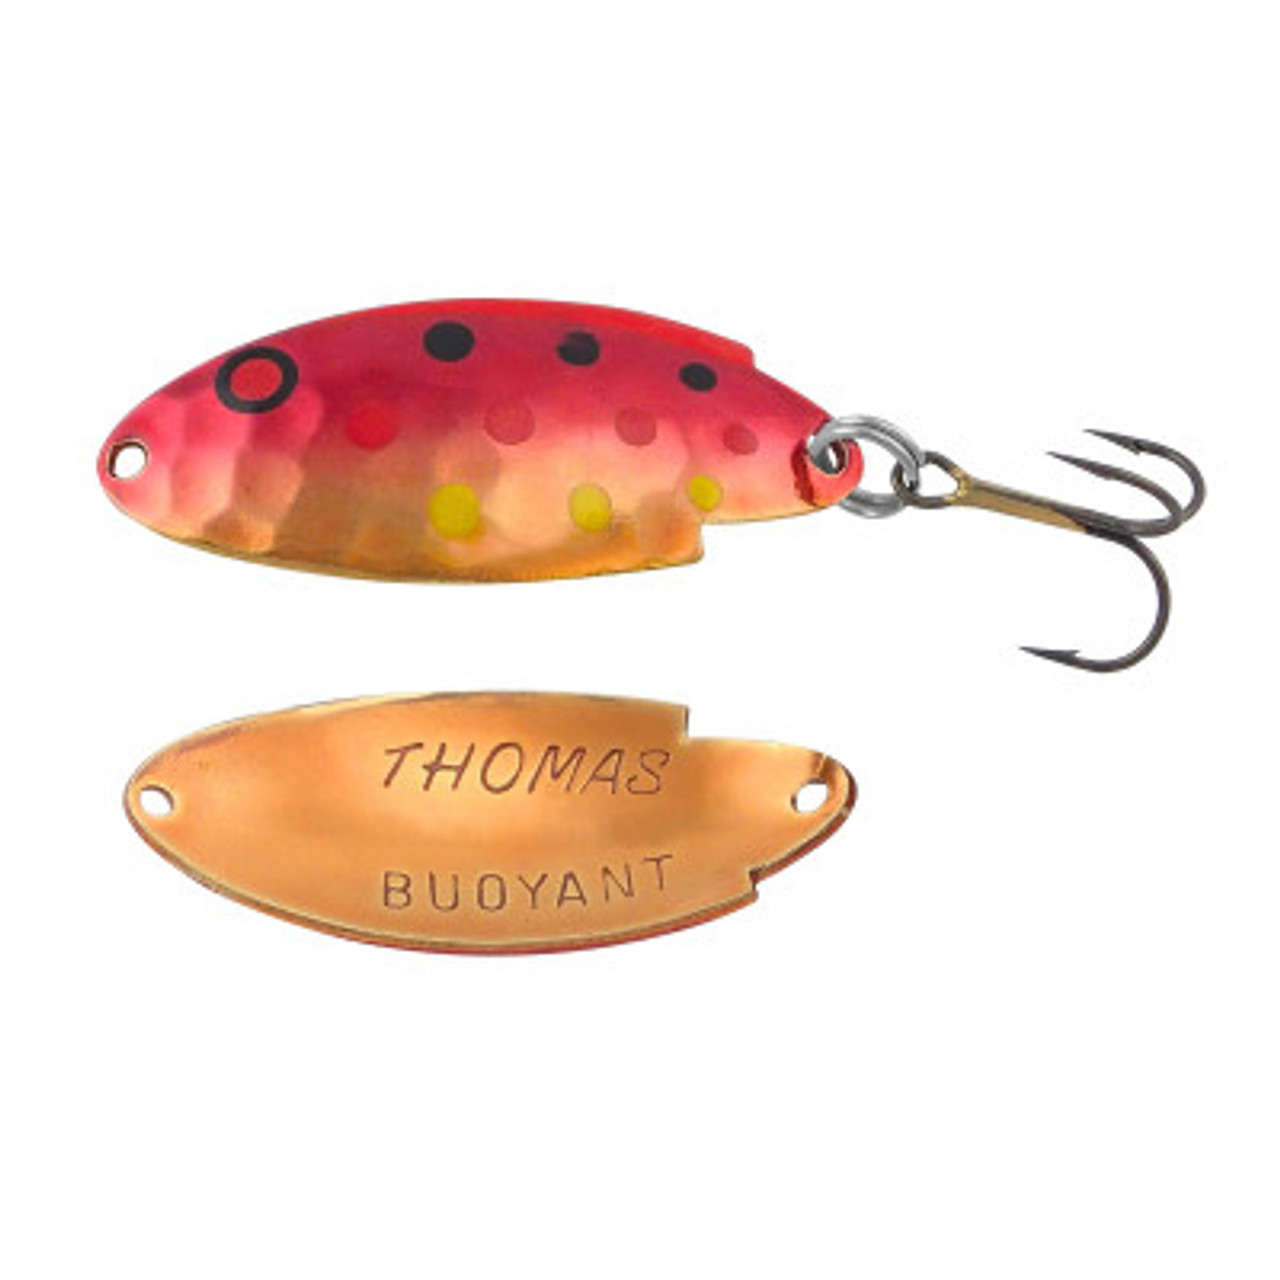 Bundle: Thomas Buoyant Wobbler Casting/Trolling Spoons - One Each of  Nickel, Chartreuse, Gold/Red and Rainbow Trout. Each Minnow is 1.5 and 1/6  oz. Also Includes Anglints Fishing ID Holder., Spoons 